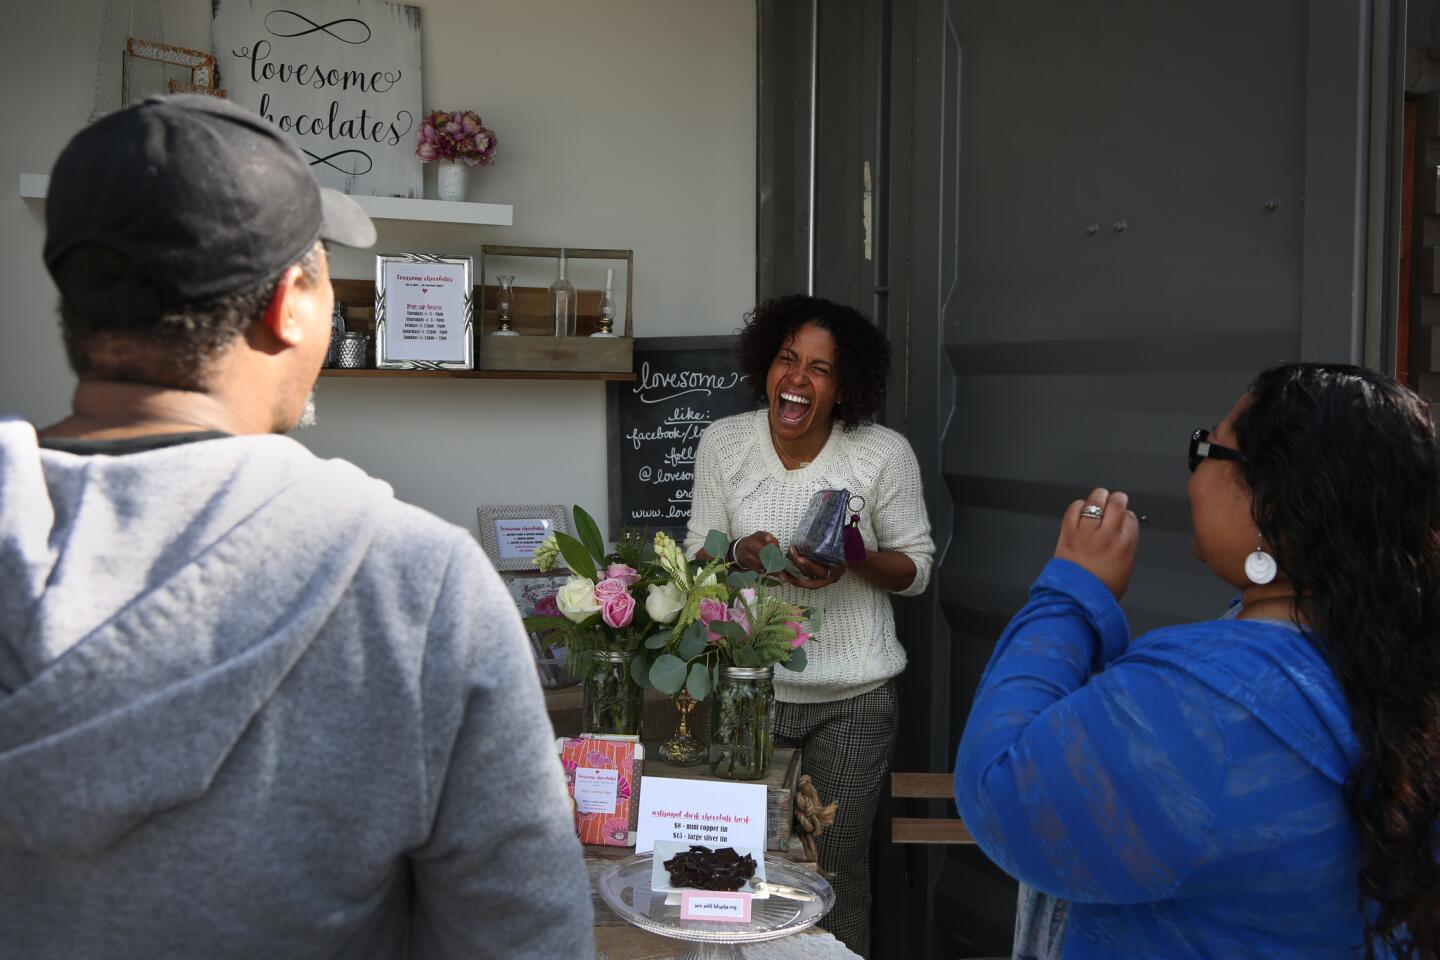 Nicole Moore, 47, center, spreads the love at her shop, Lovesome Chocolates, at Steelcraft in Long Beach.